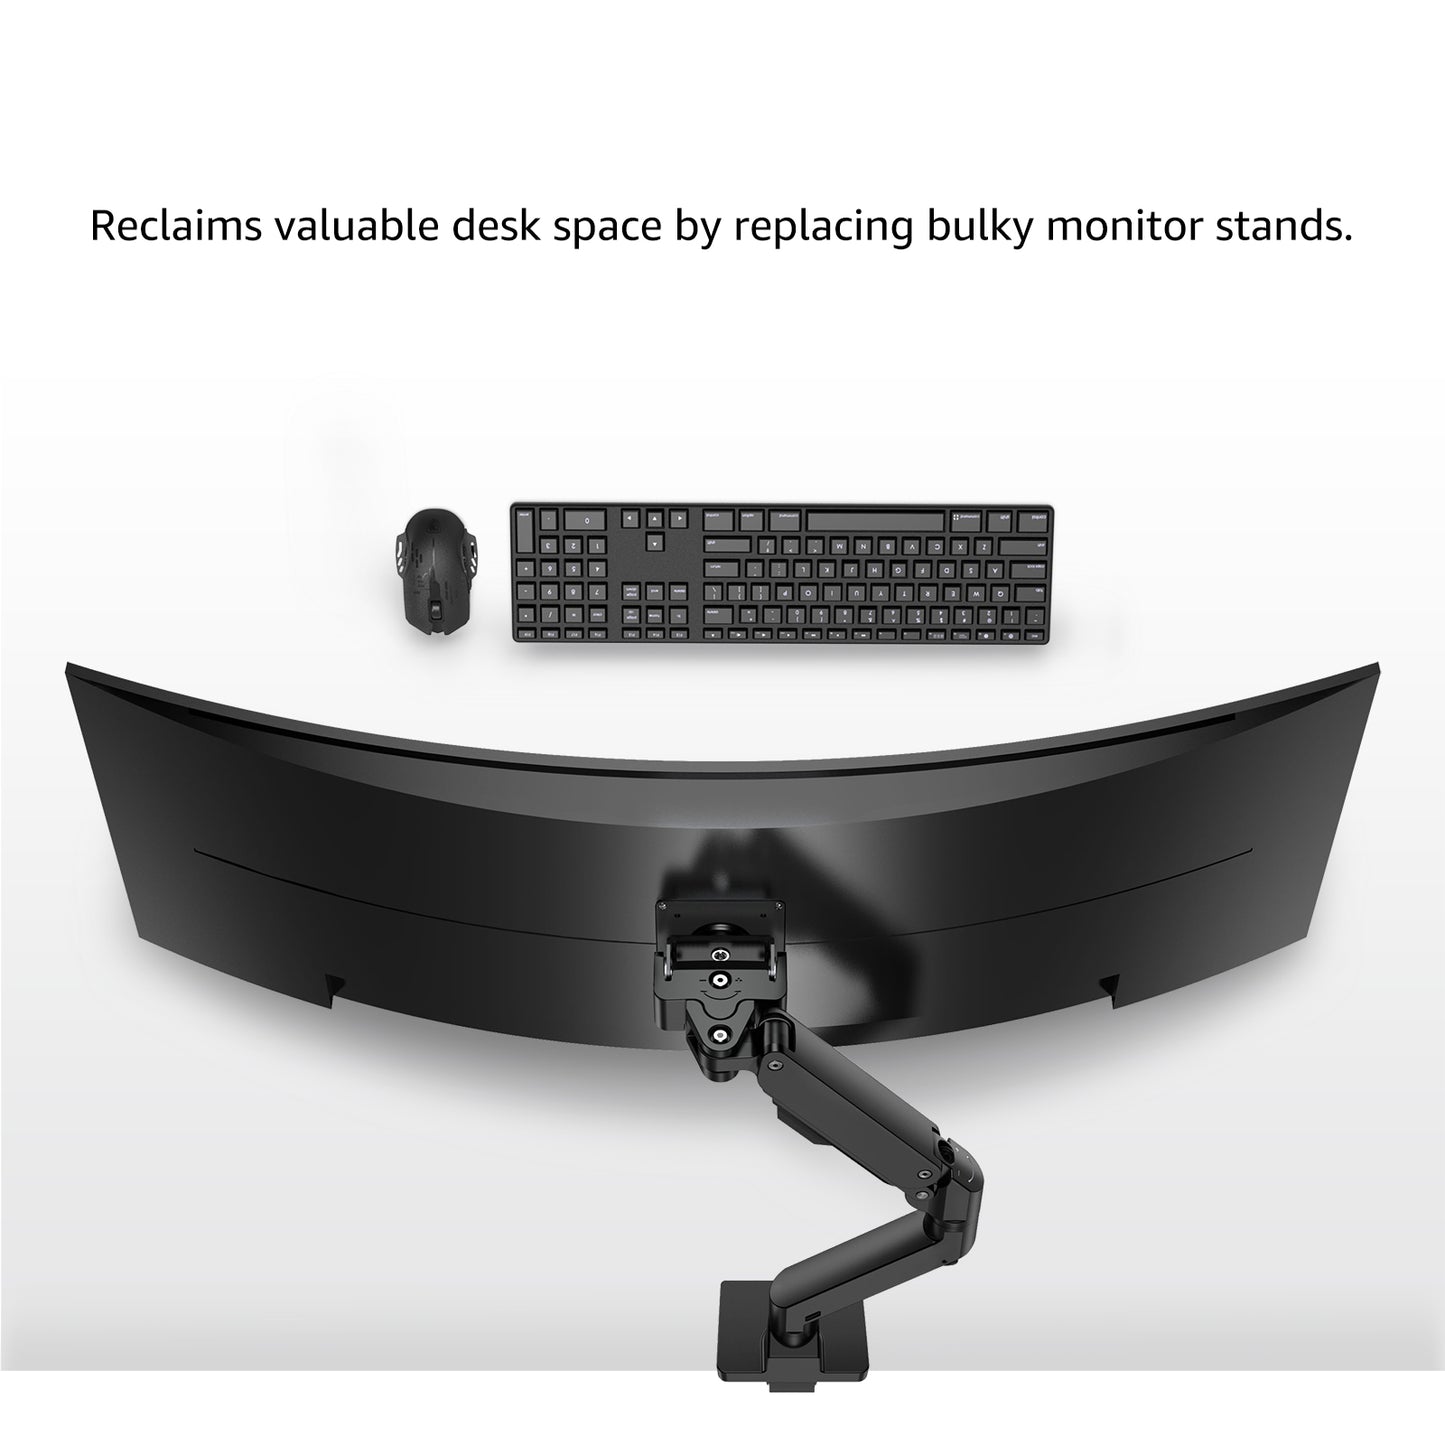 Single Ultrawide Monitor Arm , VESA Desk Mount – For 1000R Curved Monitors Up to 49 Inches, up to 44 lbs